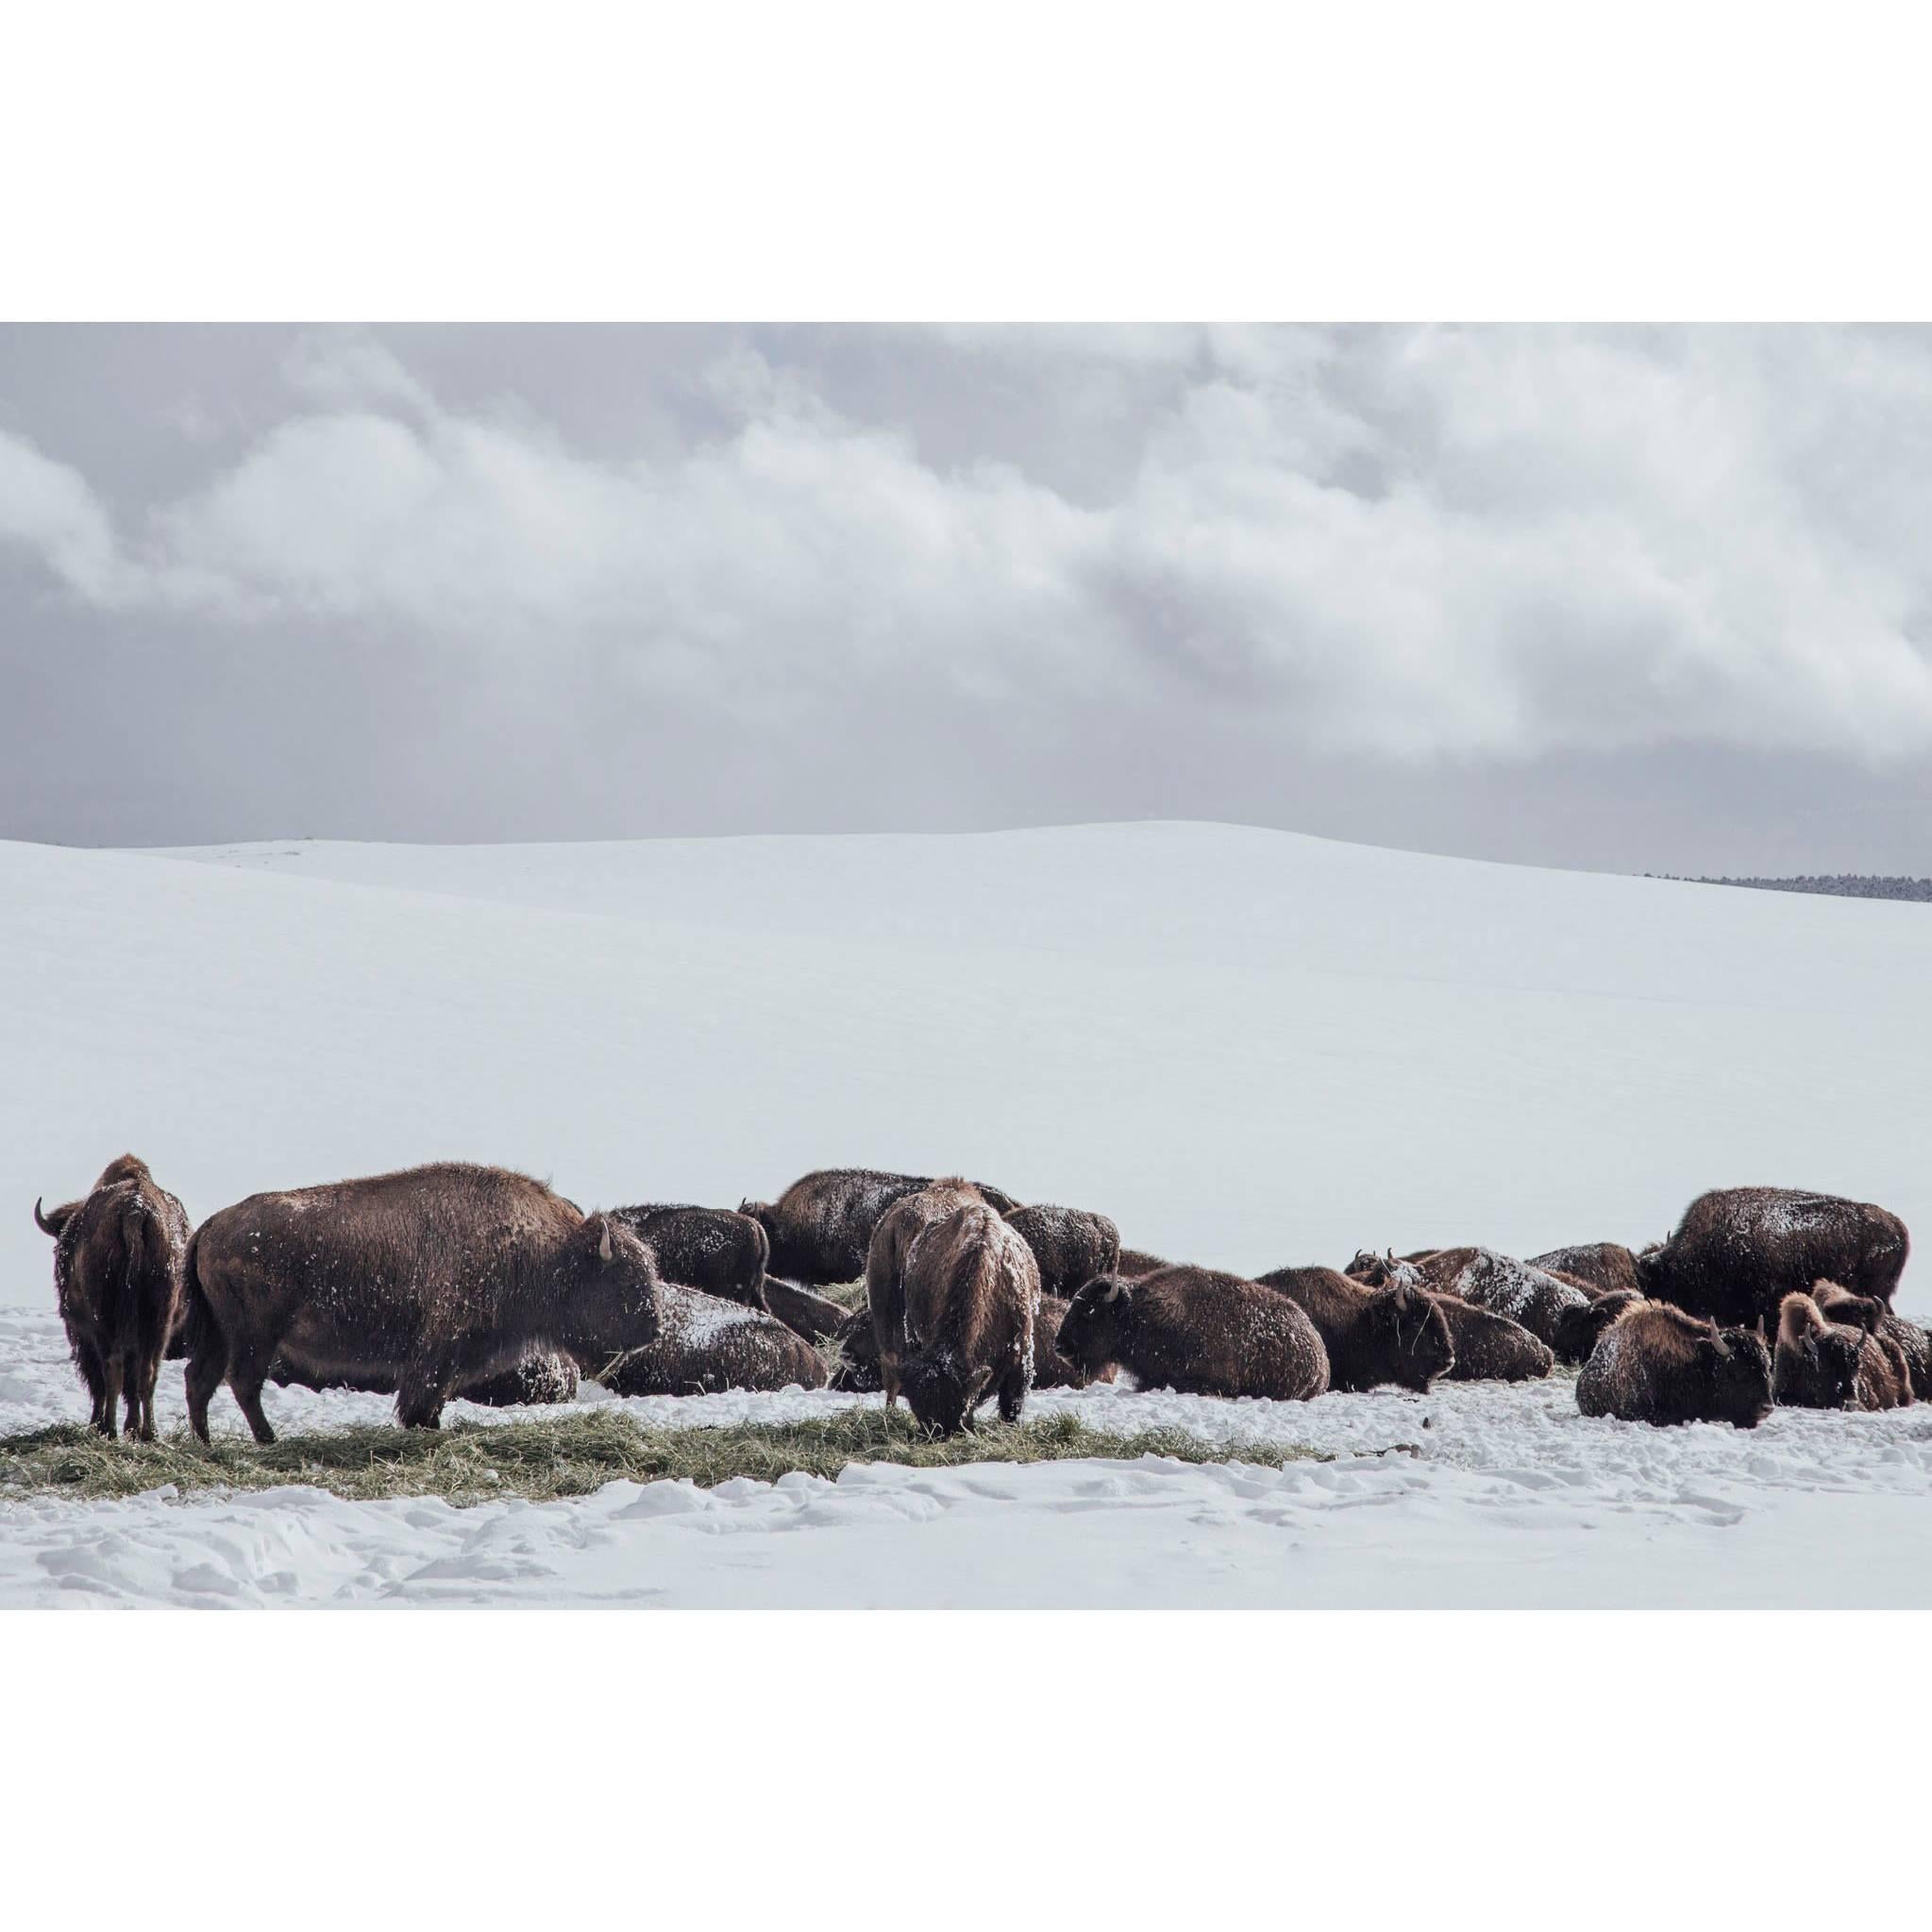 Original Photography "Buffalo" by Maxime Bastide French Photographer For Sale